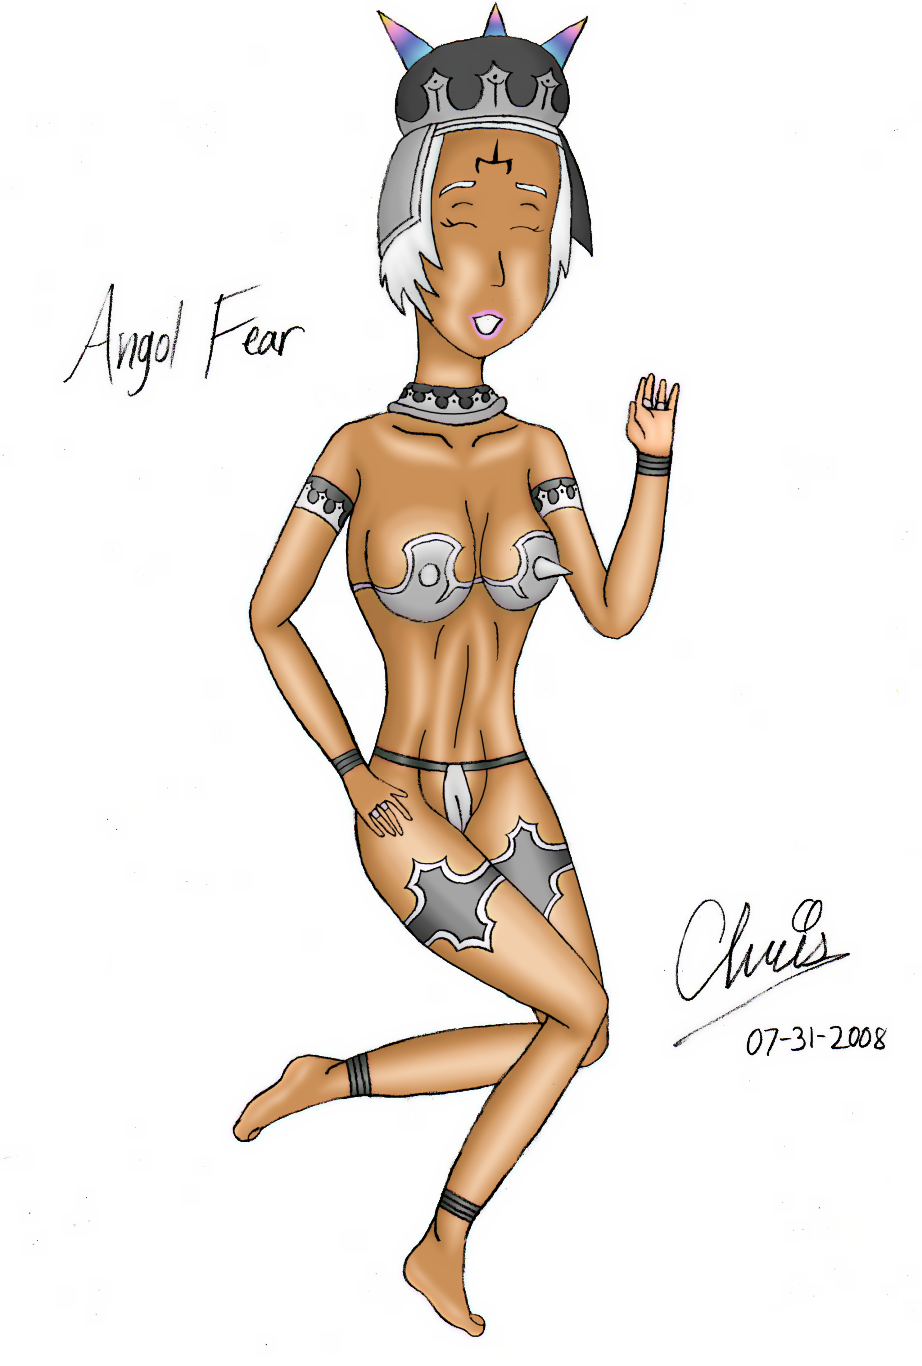 Angol Fear's day off by Cclarke